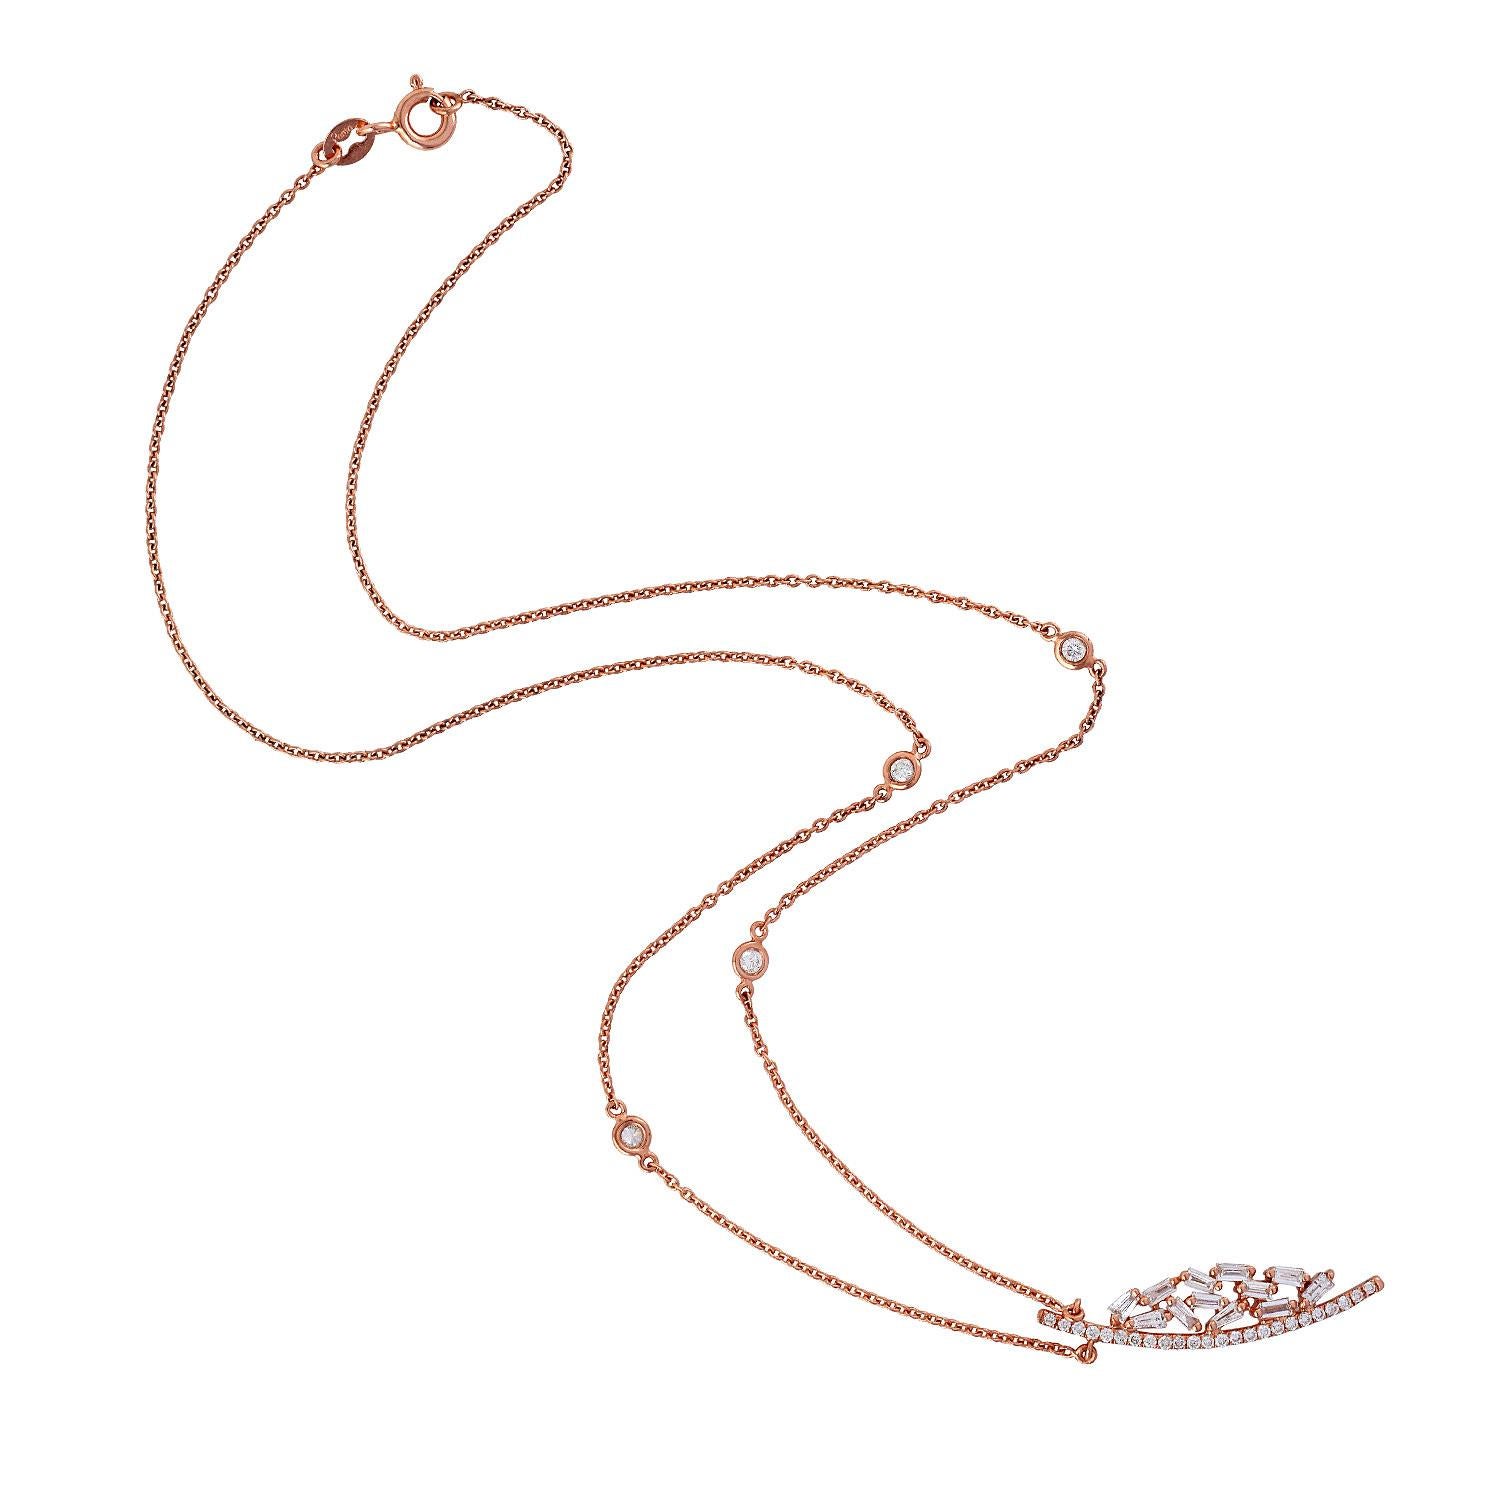 Modern Designer Choker Necklace with Baguette Diamonds Charm Made in 18k Rose Gold For Sale